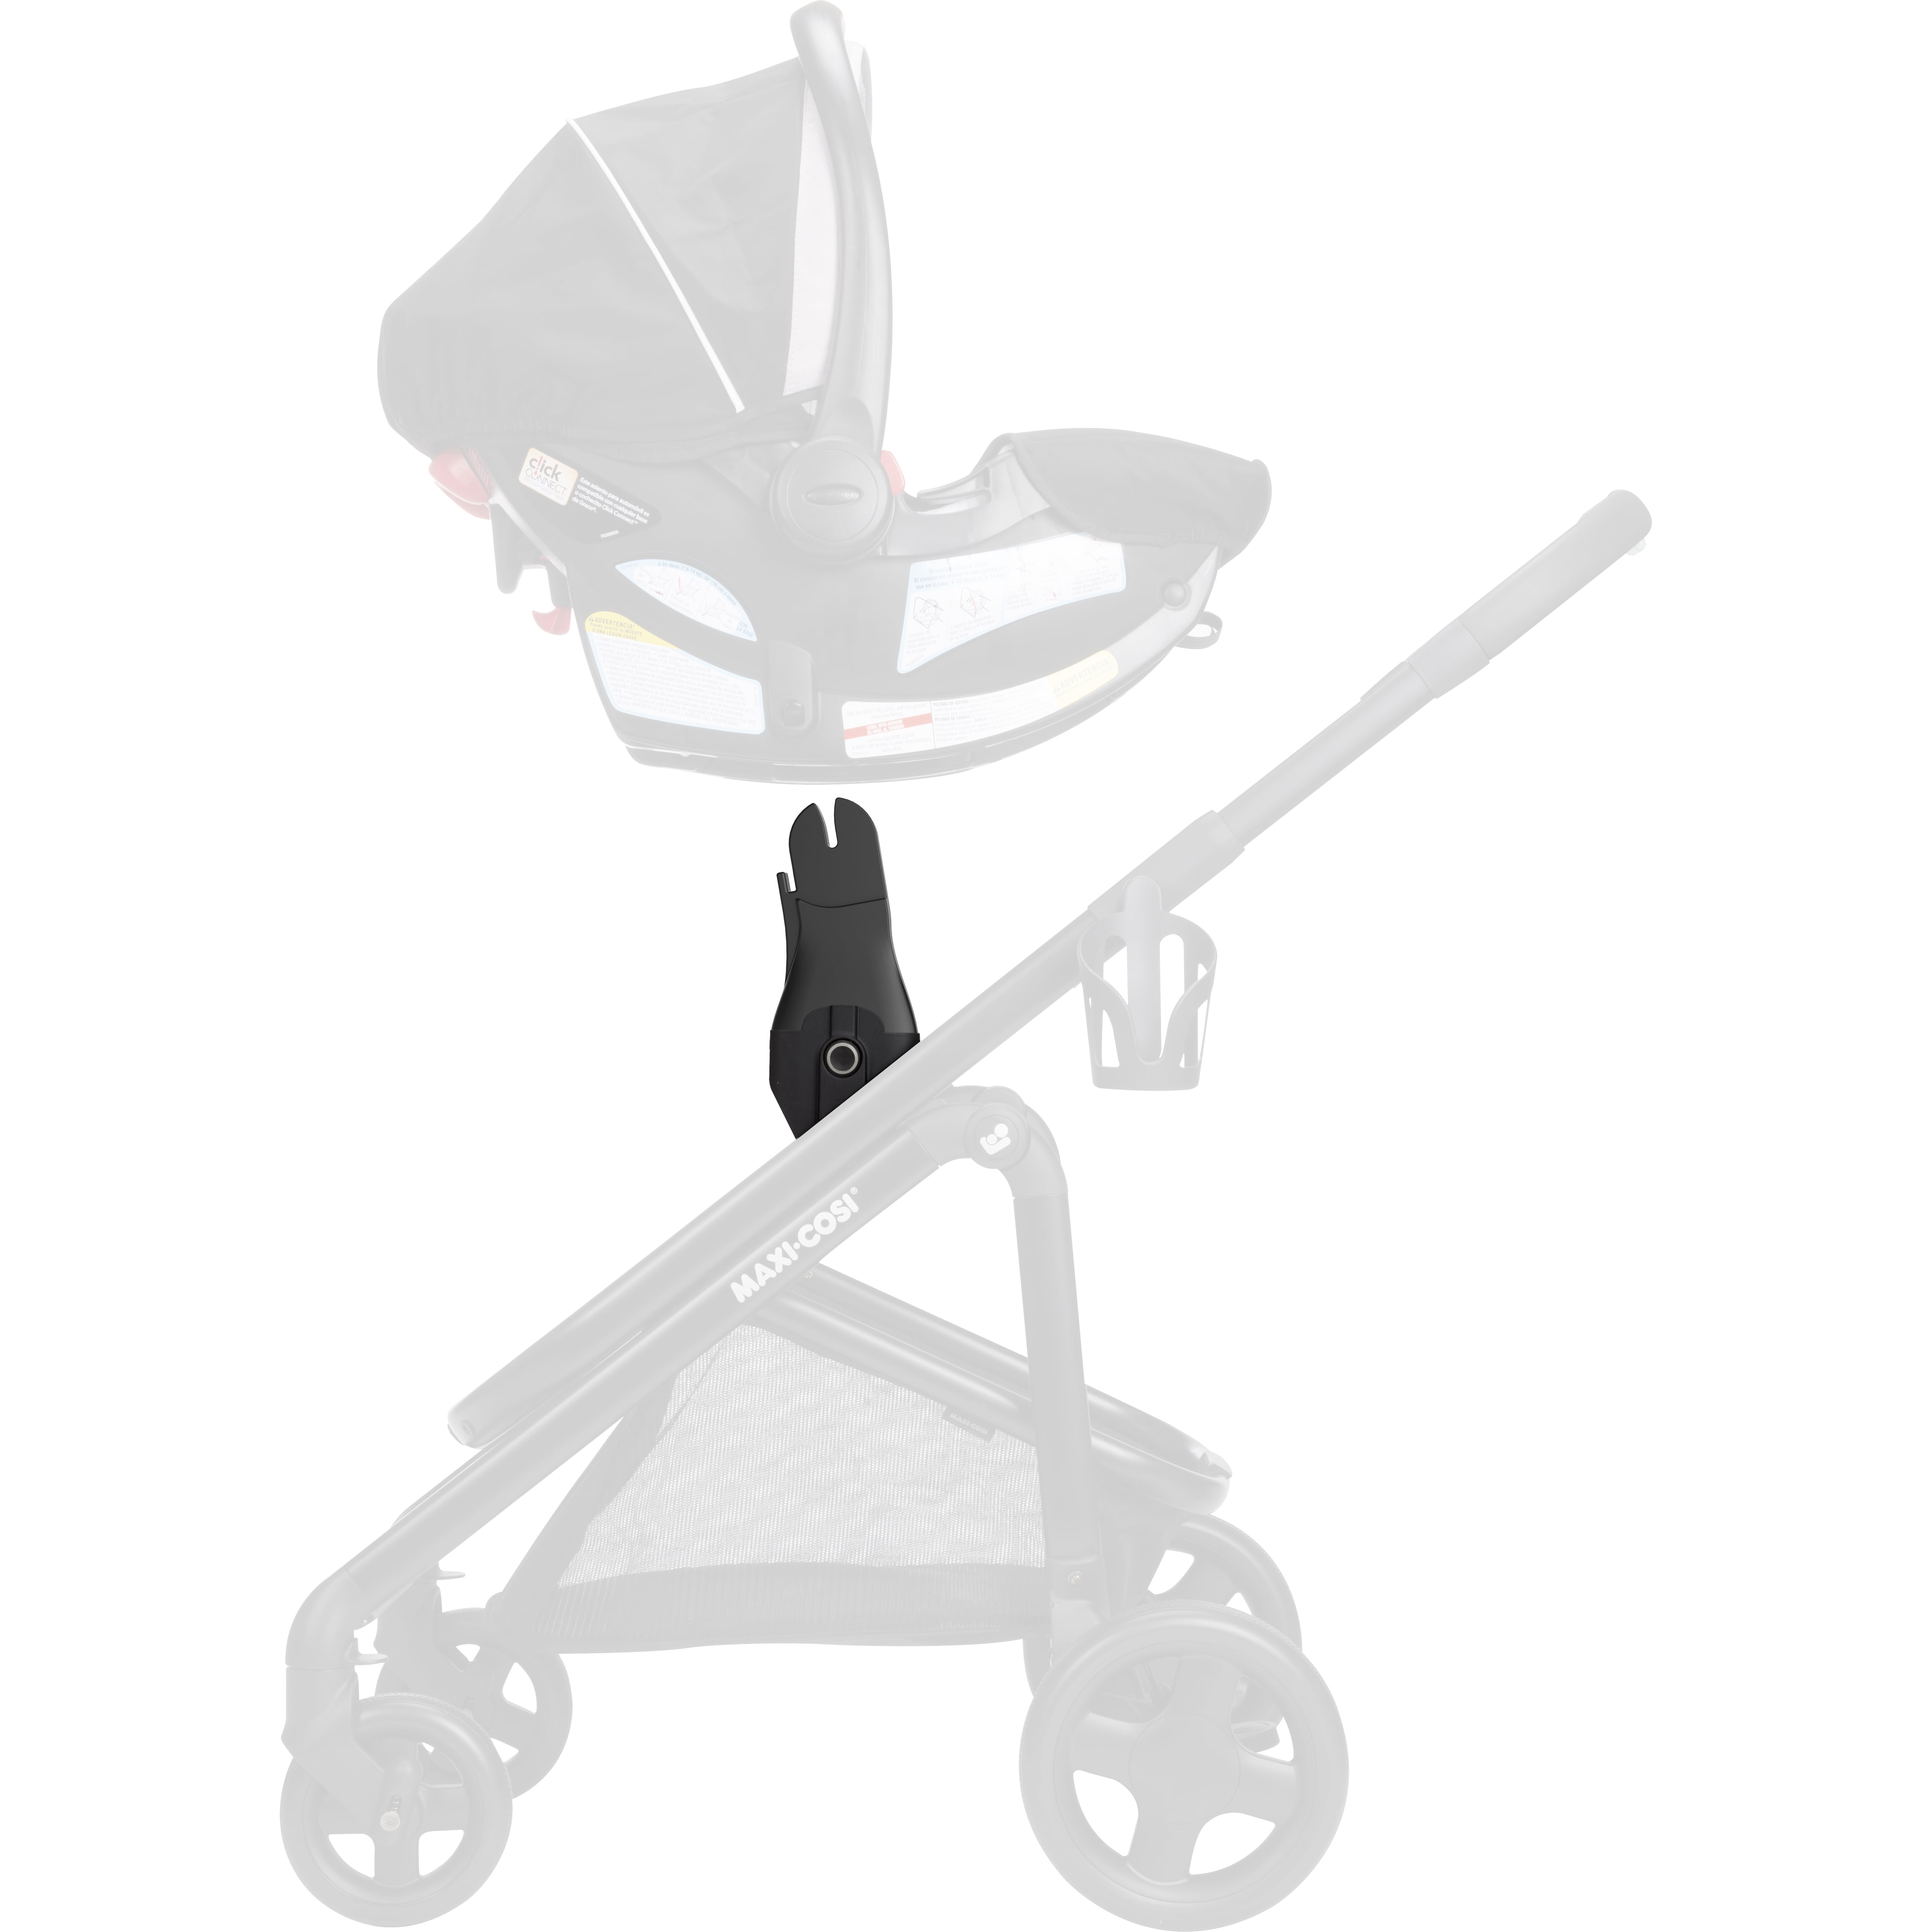 Maxi-Cosi Adapter for Select Maxi-Cosi Strollers and Graco Car Seats Black 